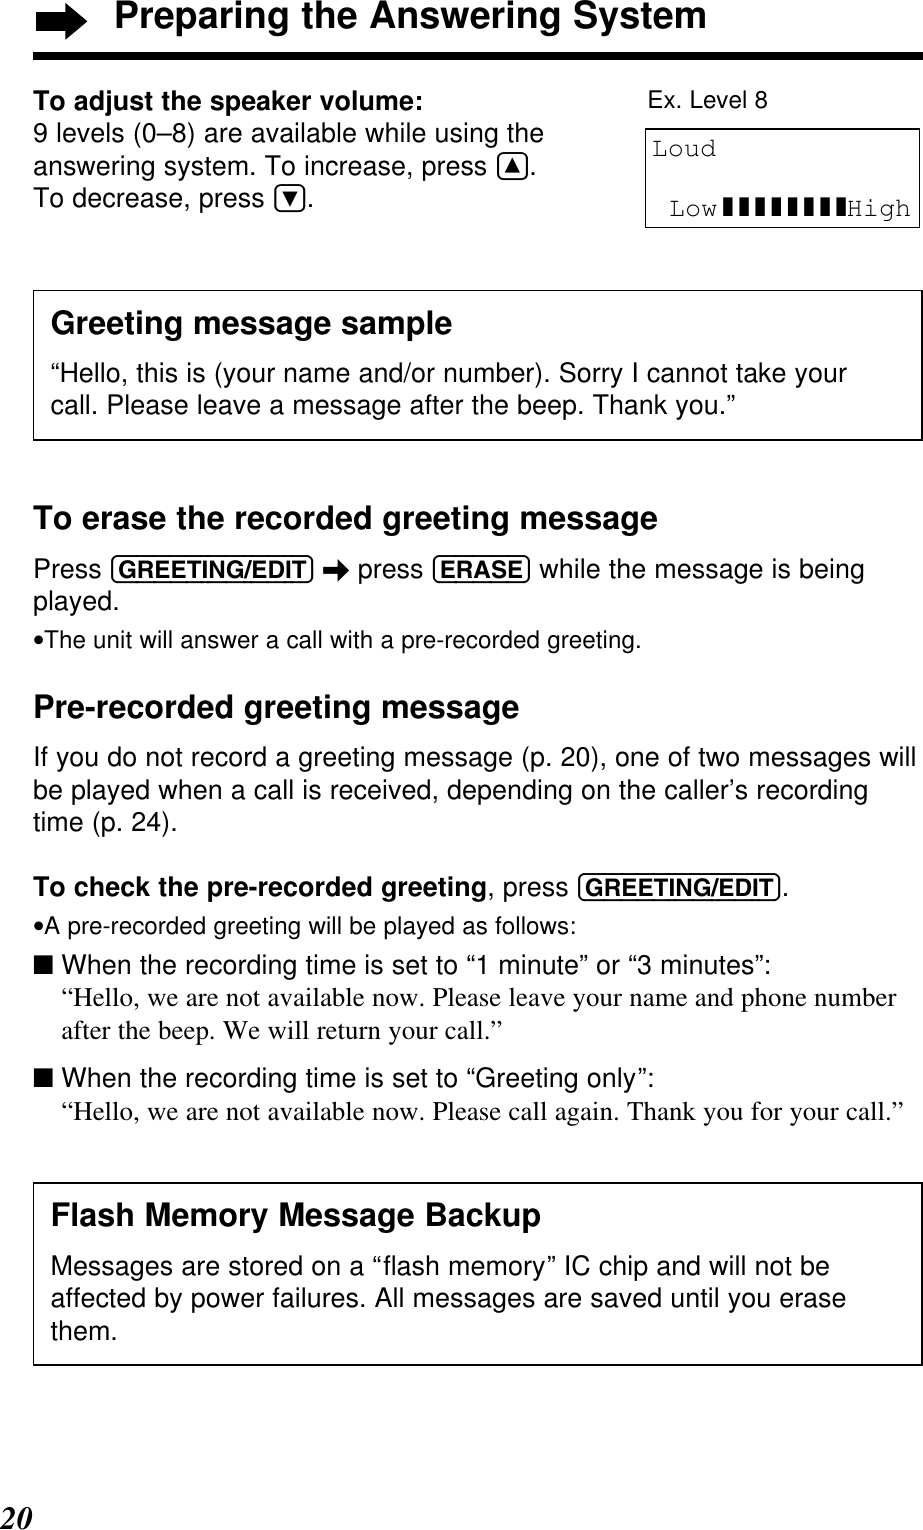 20Preparing the Answering SystemTo erase the recorded greeting messagePress (GREETING/EDIT) \press (ERASE) while the message is beingplayed.•The unit will answer a call with a pre-recorded greeting.Pre-recorded greeting messageIf you do not record a greeting message (p. 20), one of two messages willbe played when a call is received, depending on the caller’s recordingtime (p. 24).To check the pre-recorded greeting, press (GREETING/EDIT).•A pre-recorded greeting will be played as follows:■ When the recording time is set to “1 minute” or “3 minutes”: “Hello, we are not available now. Please leave your name and phone numberafter the beep. We will return your call.”■ When the recording time is set to “Greeting only”: “Hello, we are not available now. Please call again. Thank you for your call.”Flash Memory Message BackupMessages are stored on a “ﬂash memory” IC chip and will not beaffected by power failures. All messages are saved until you erasethem.Greeting message sample“Hello, this is (your name and/or number). Sorry I cannot take yourcall. Please leave a message after the beep. Thank you.”To adjust the speaker volume:9 levels (0–8) are available while using theanswering system. To increase, press Ñ. To decrease, press Ö.LoudLow ❚❚❚❚❚❚❚❚HighEx. Level 8